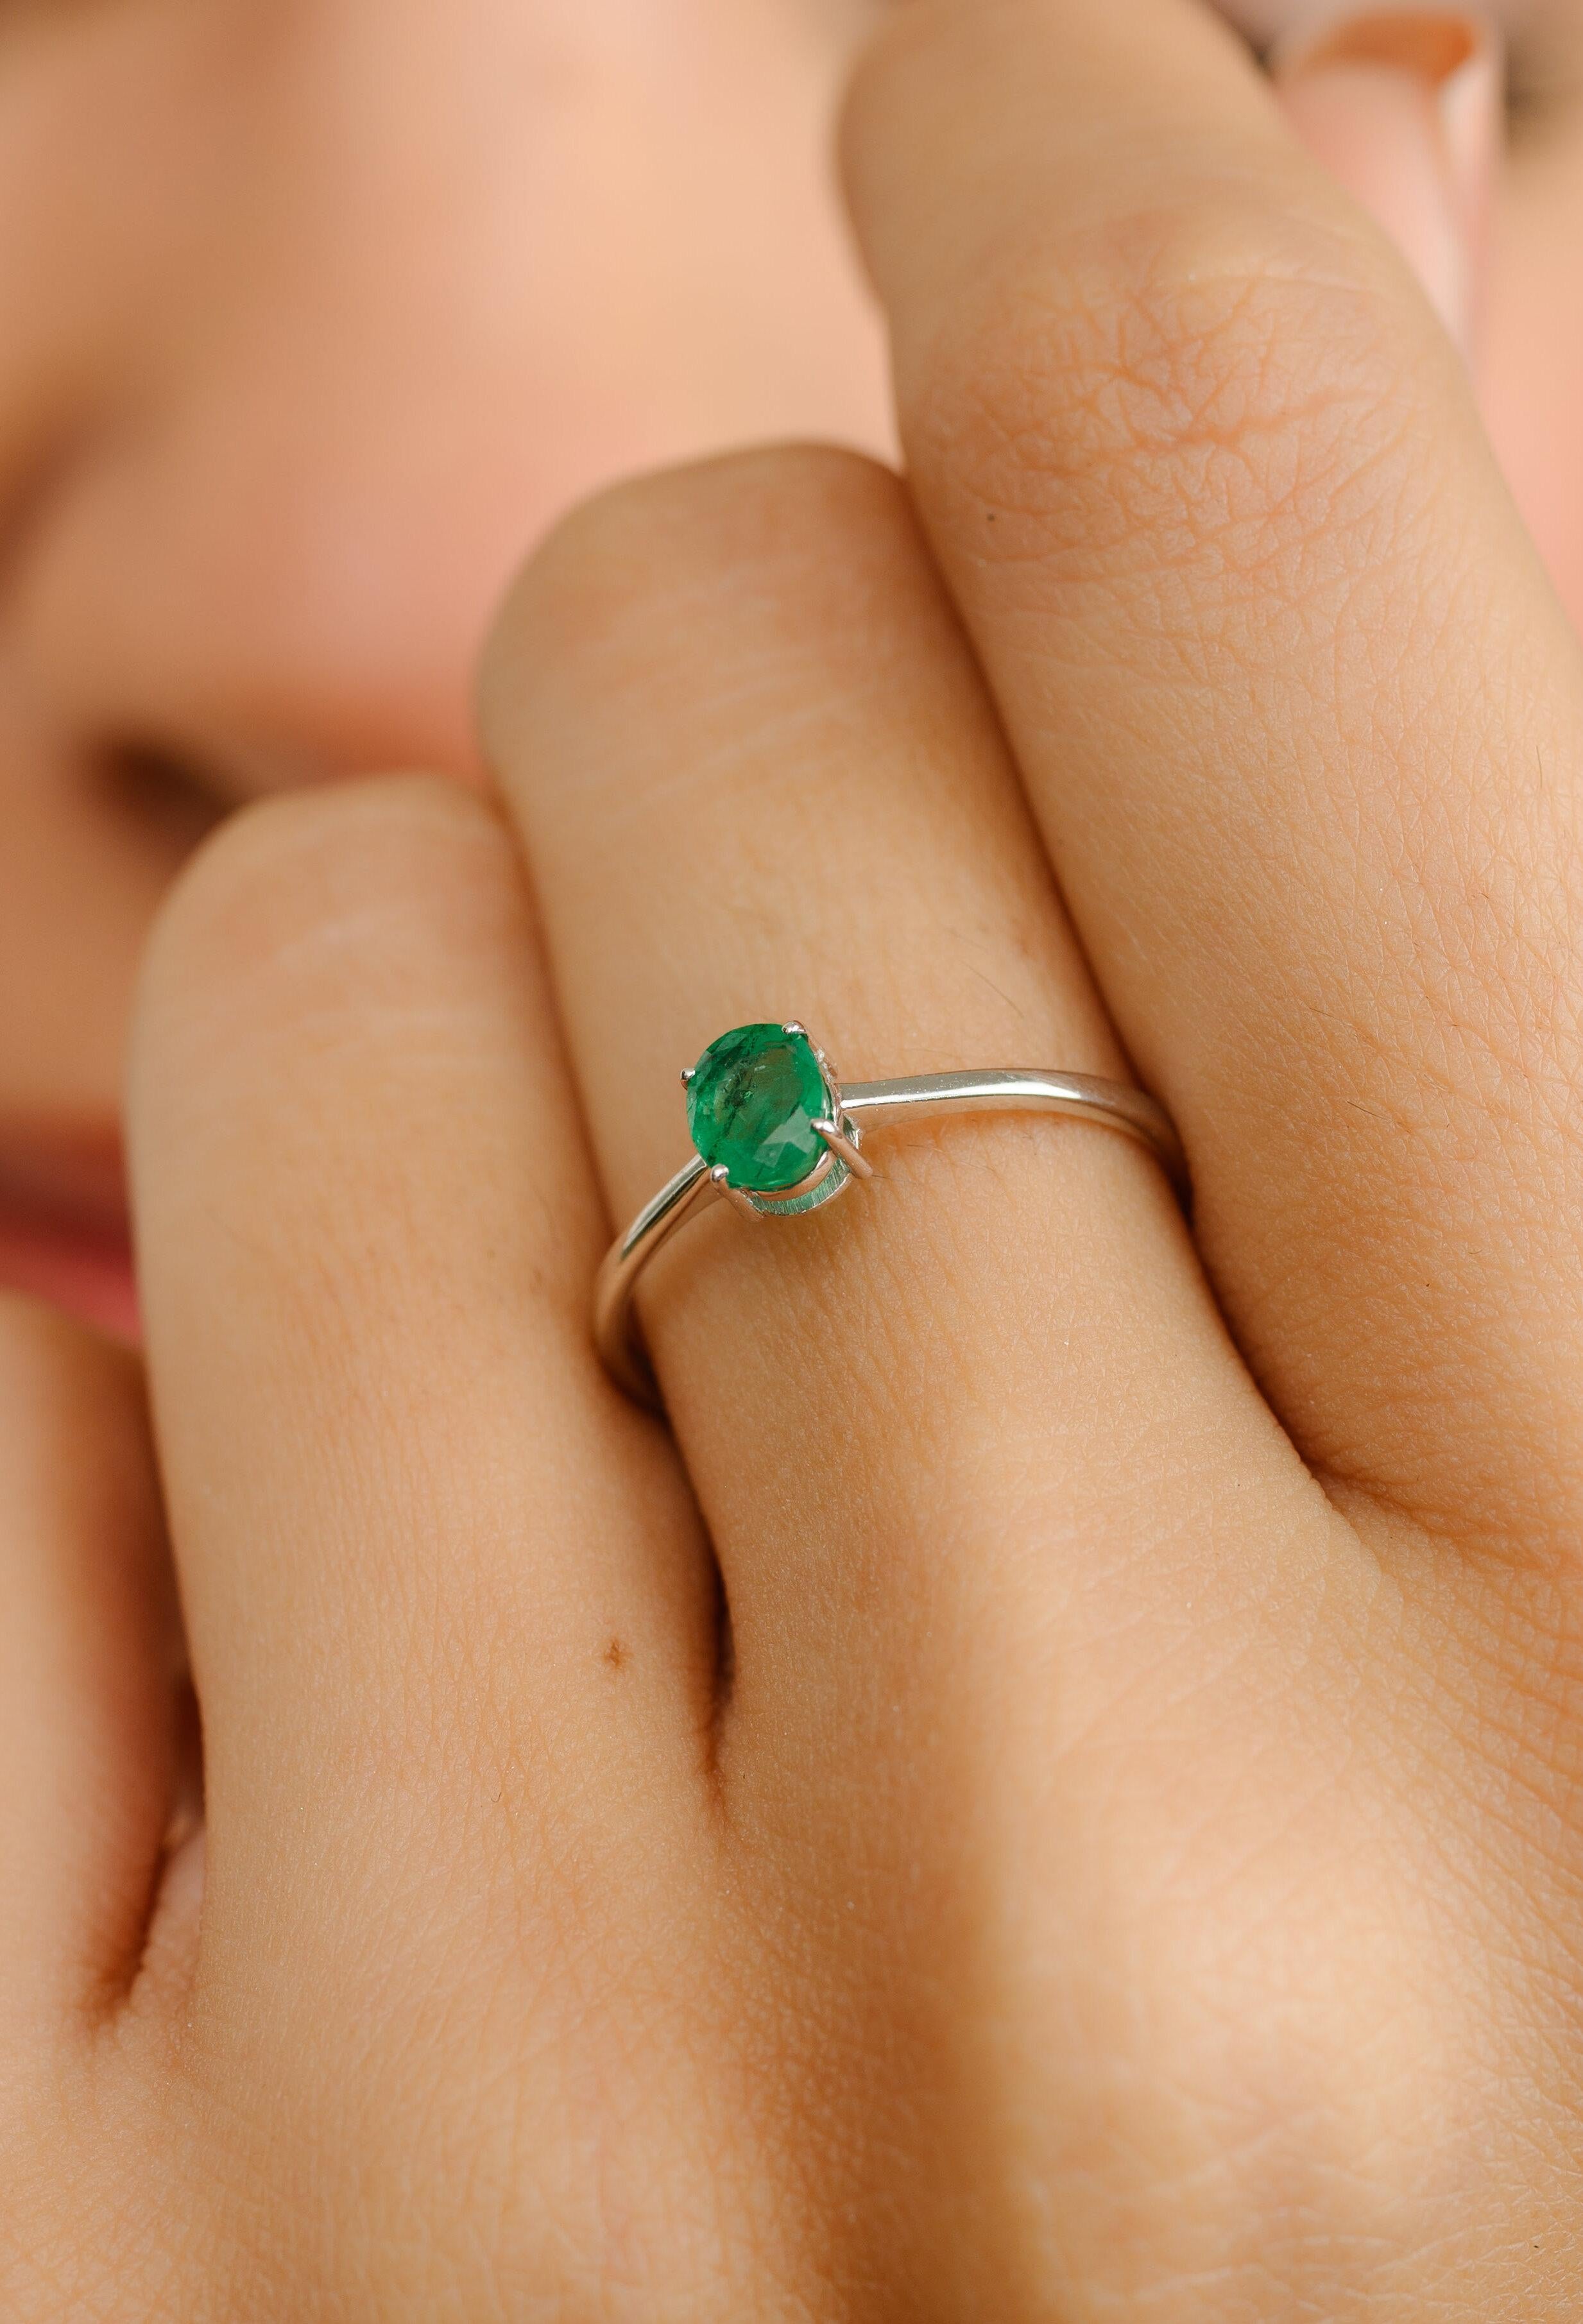 For Sale:  Handmade Natural Emerald Ring 18k Solid White Gold Minimalist Jewelry for Her 2